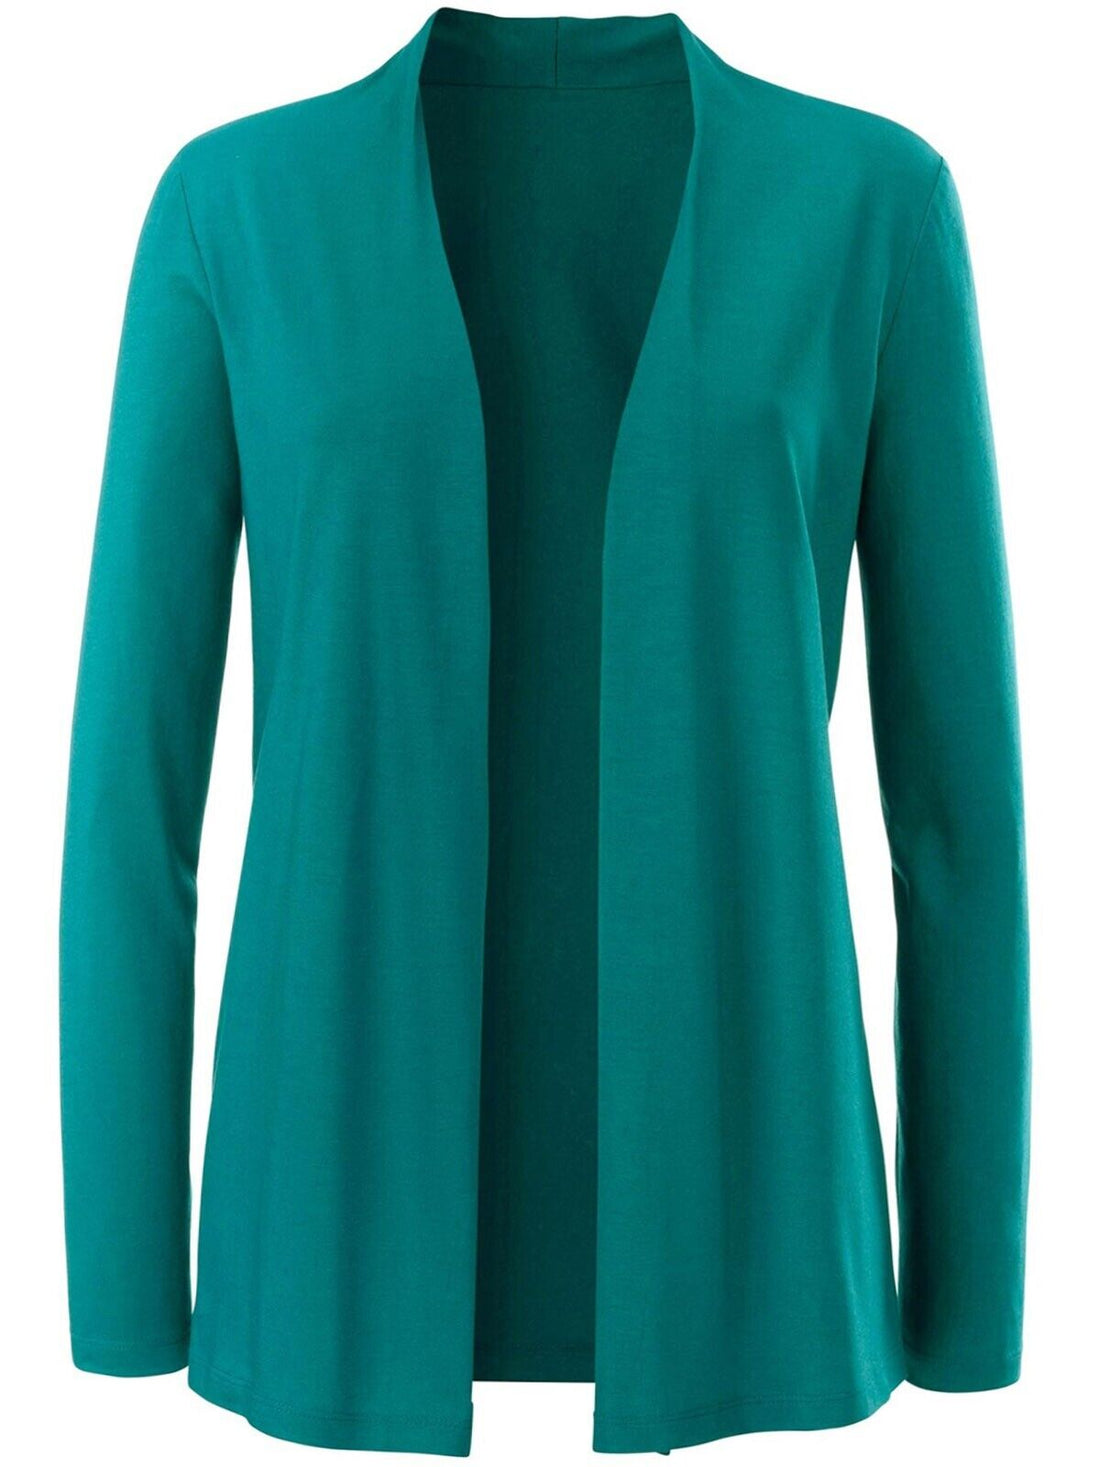 Otto Group Teal Modal Blend Open Front Cardigan Sizes 16, 18, 20, 22, 24